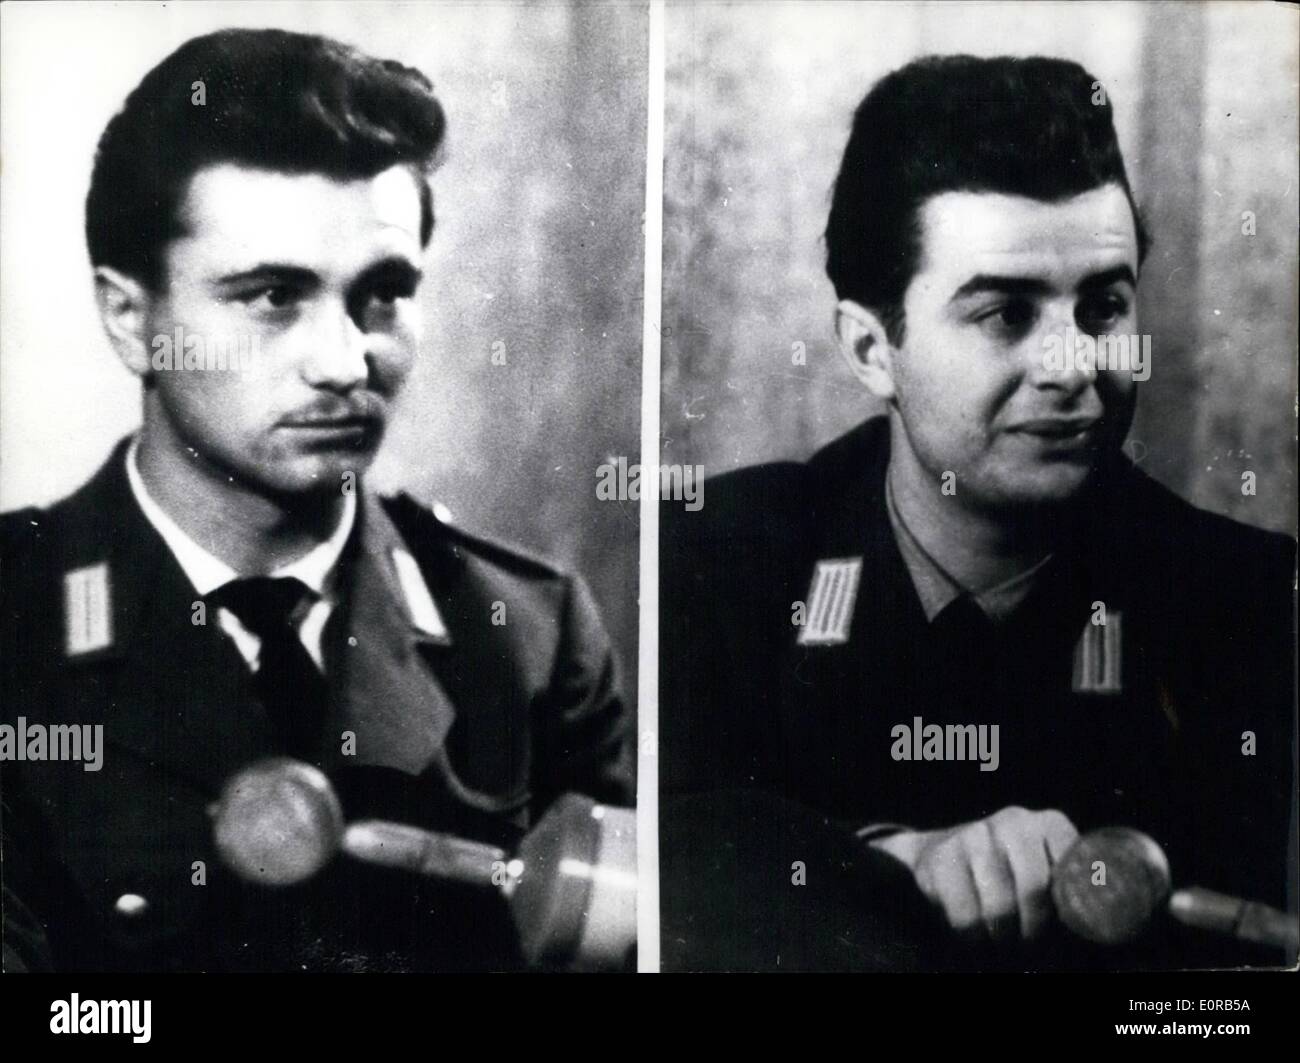 Dec. 12, 1958 - West -German soldiers said to be AWOL in Prague : Photo s of two sokers of the Bundeswehr who are told to be in Stock Photo